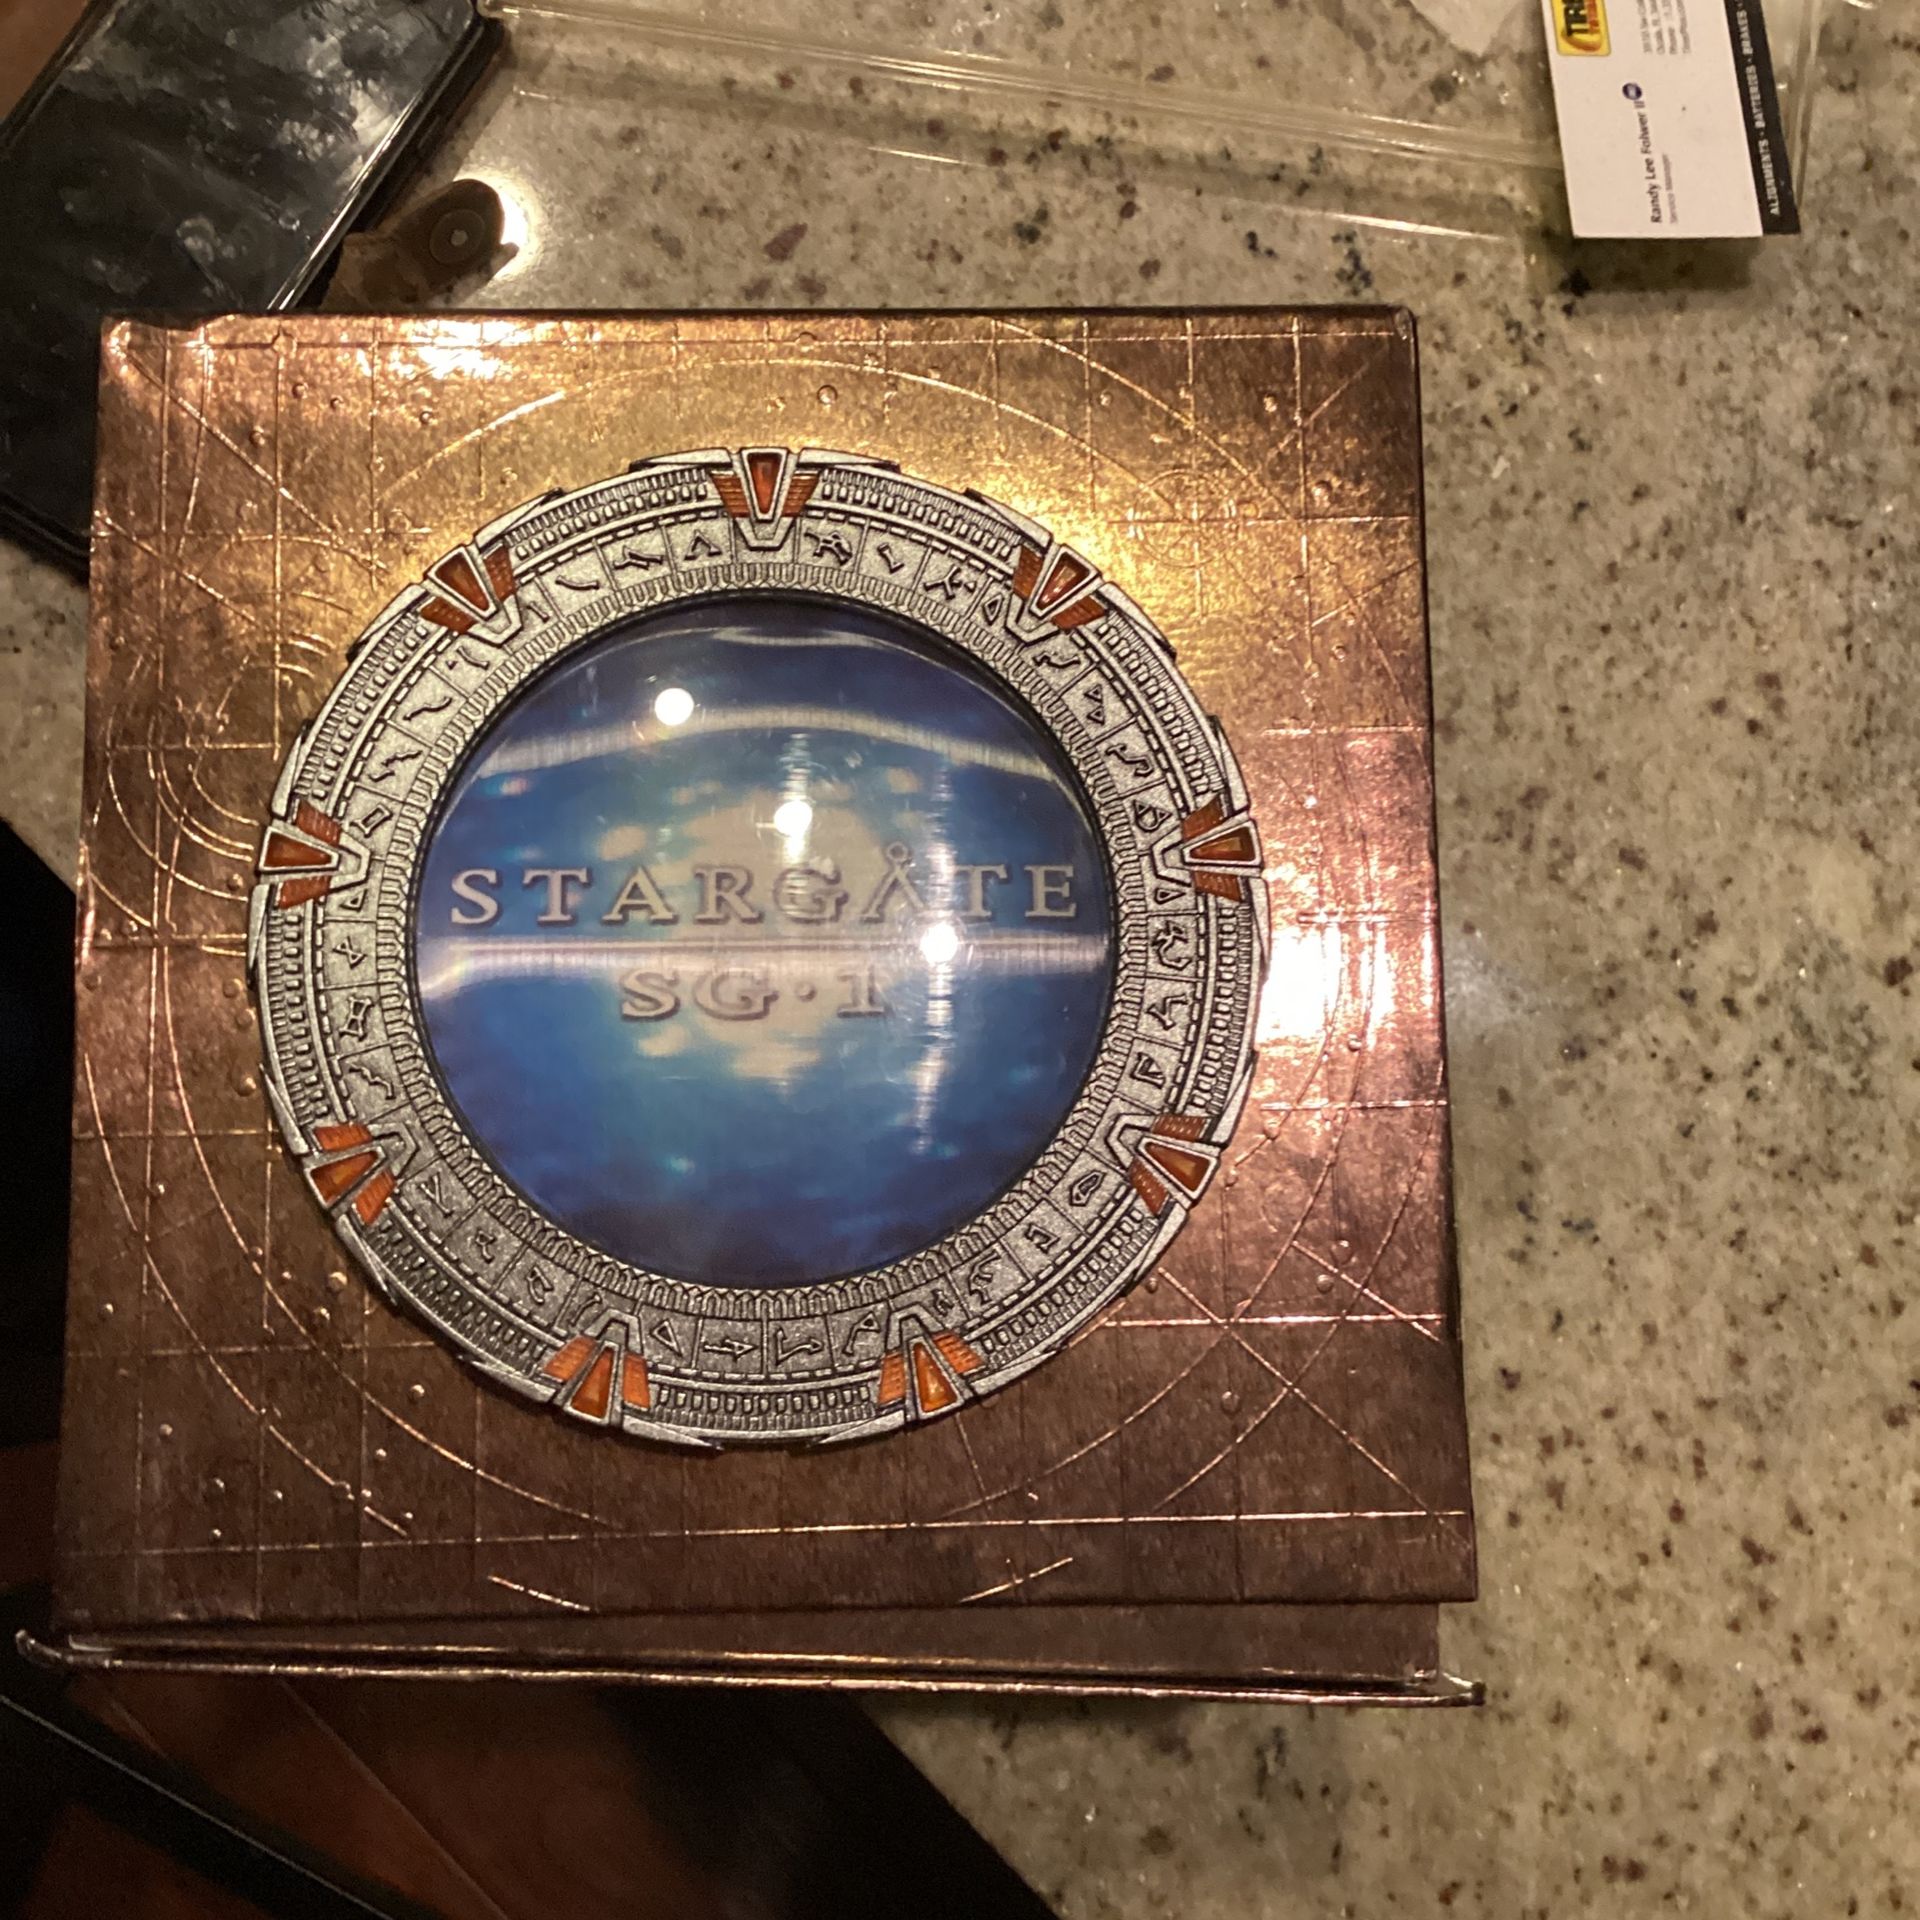 Star gate SG-1  The Complete Series Collectors Edition Box Set 54 Discs & Booklet ***Like NEW*** !!